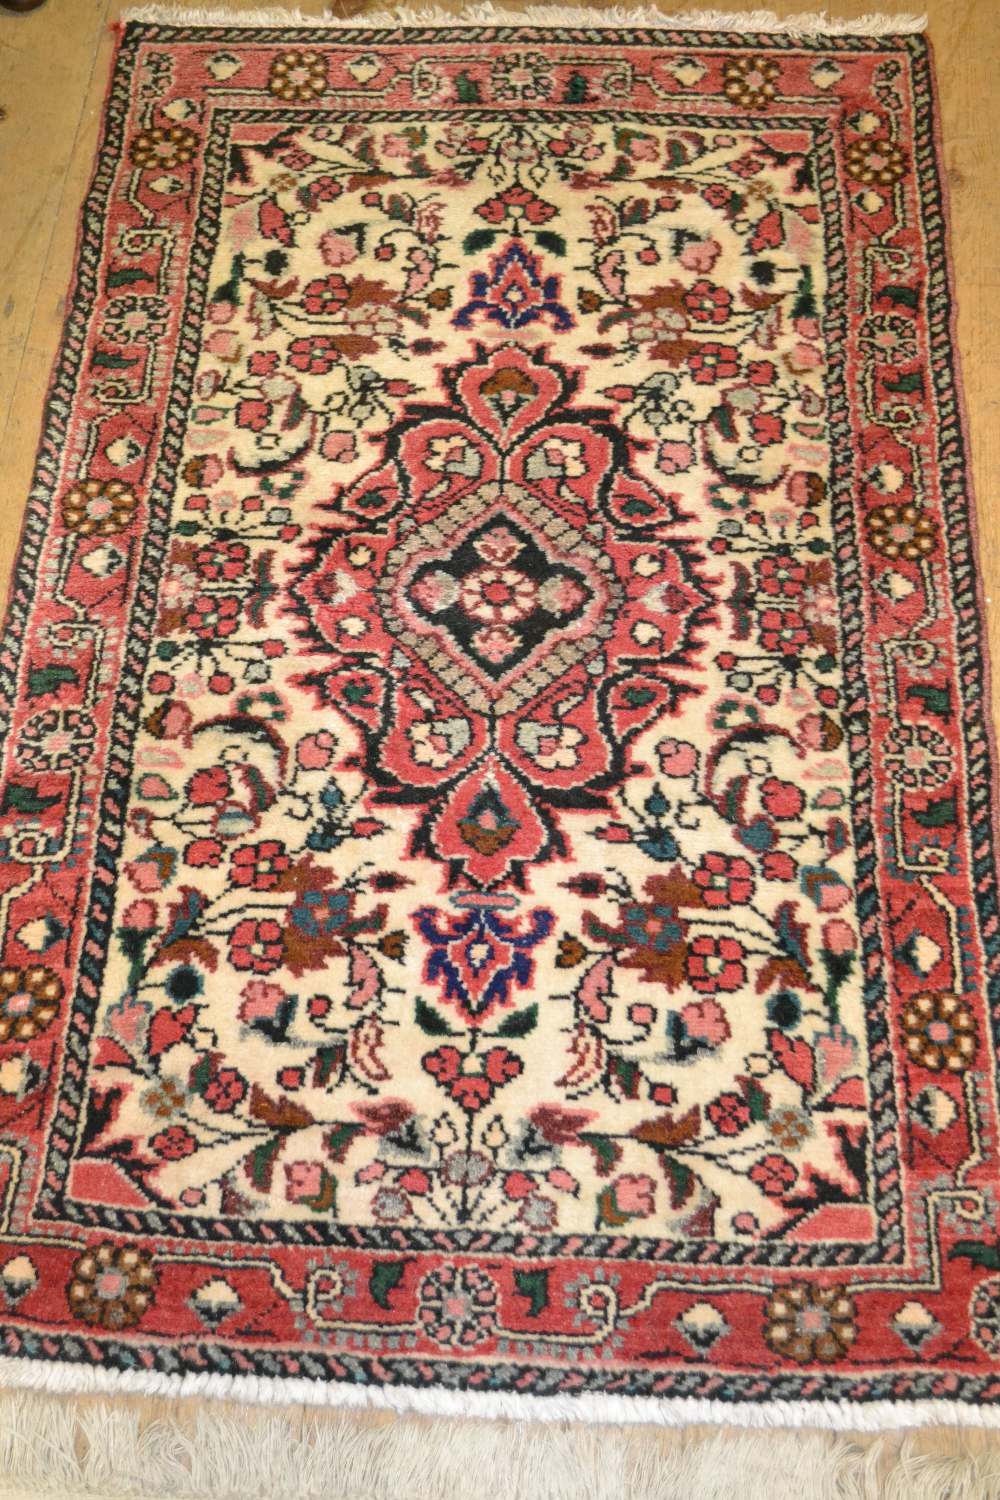 Small Persian style rug having central medallion with all-over floral decoration and multiple